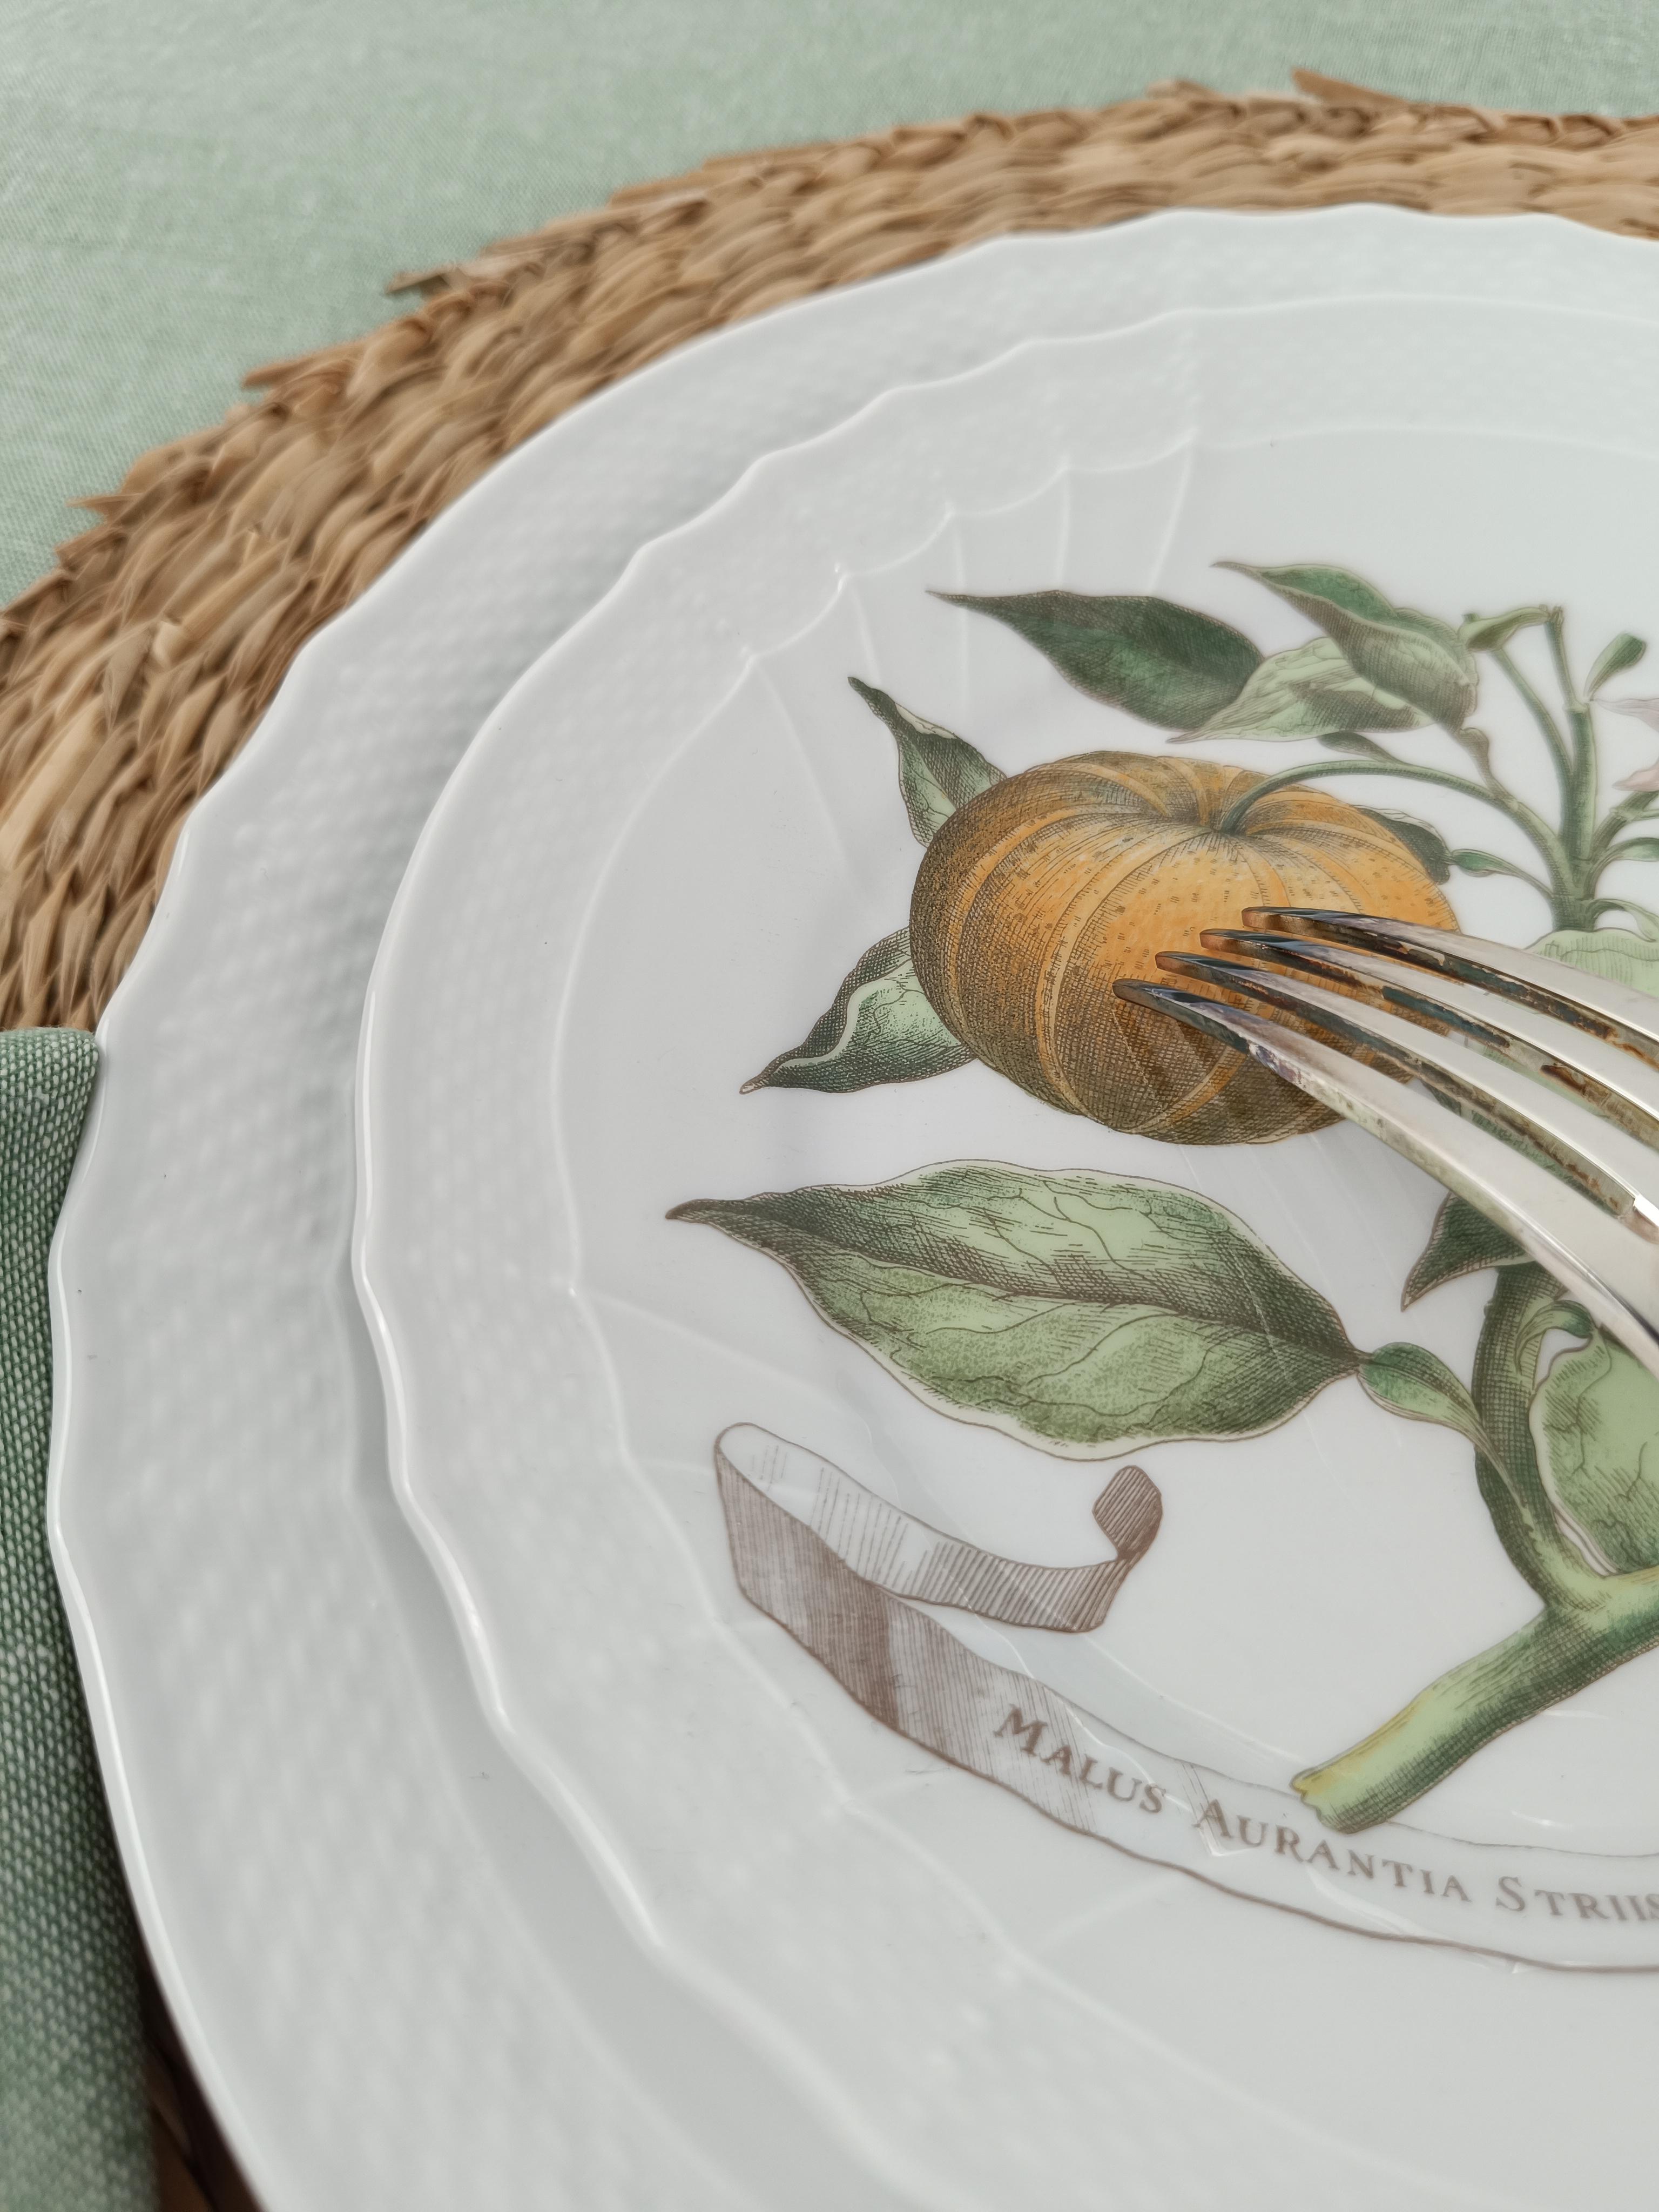 Richard Ginori China Dinner Service with a botanical print by Munting Abraham For Sale 1